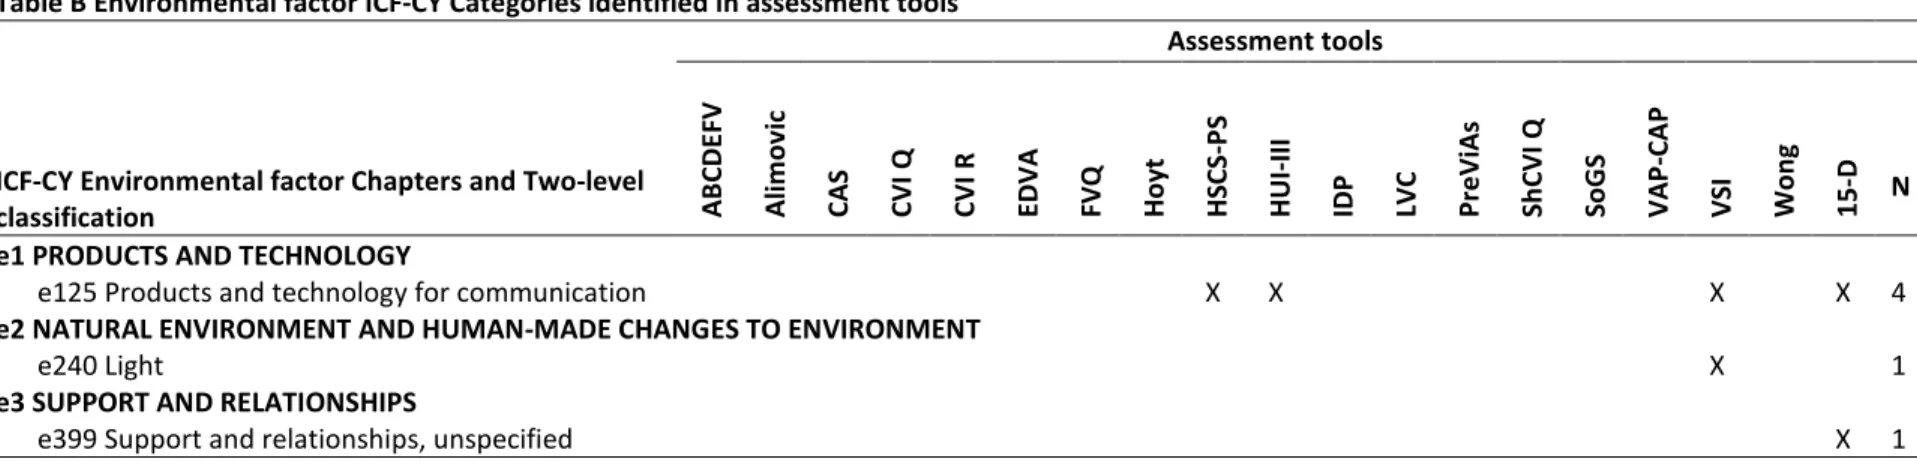 Table B Environmental factor ICF-CY Categories identified in assessment tools 